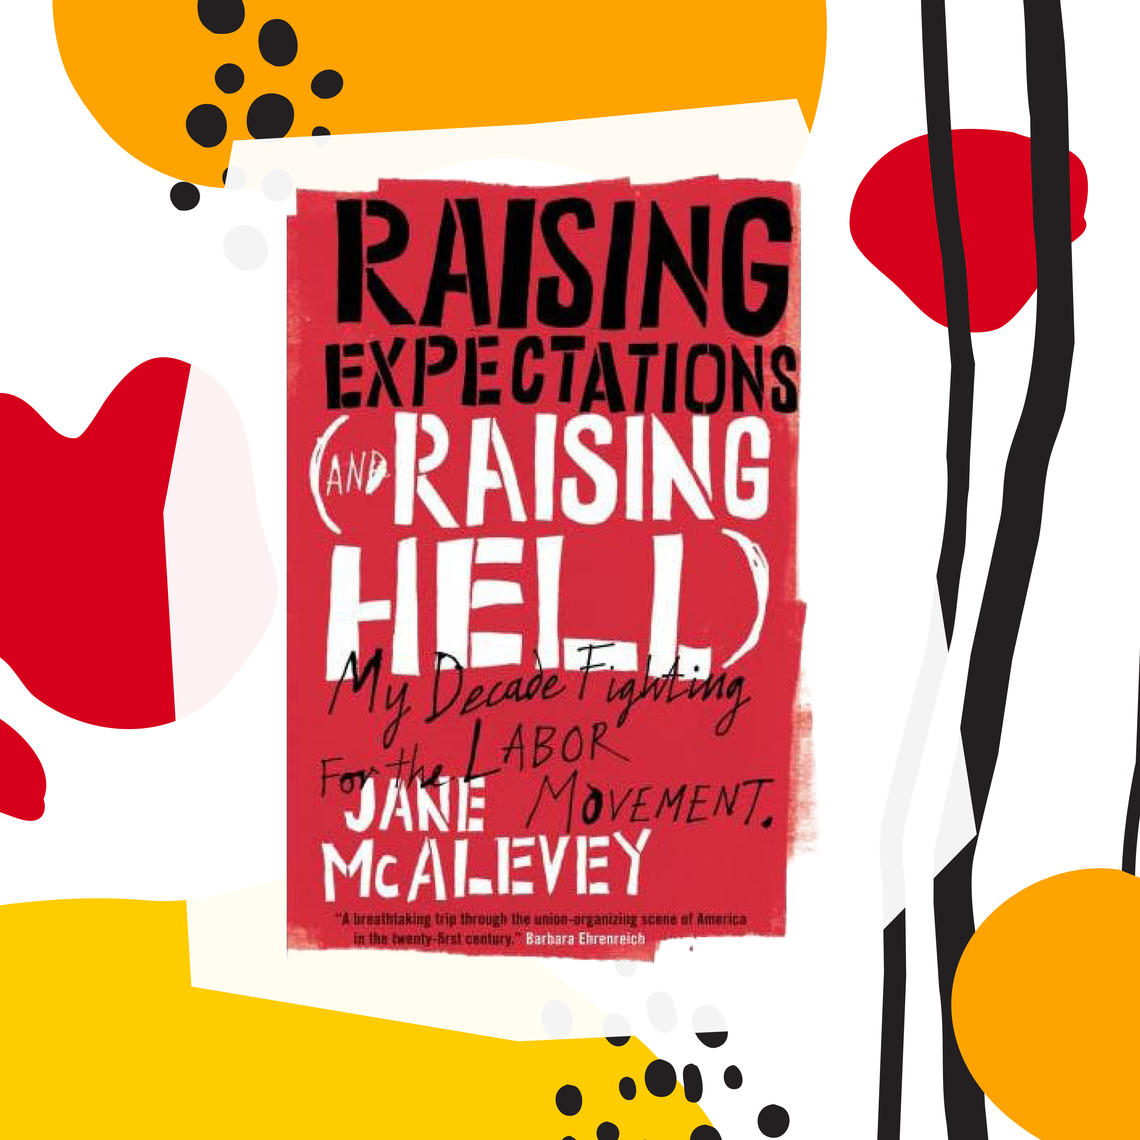 The cover of Raising Expectations (and Raising Hell): My Decade Fighting for the Labor Movement by Jane McAlevey